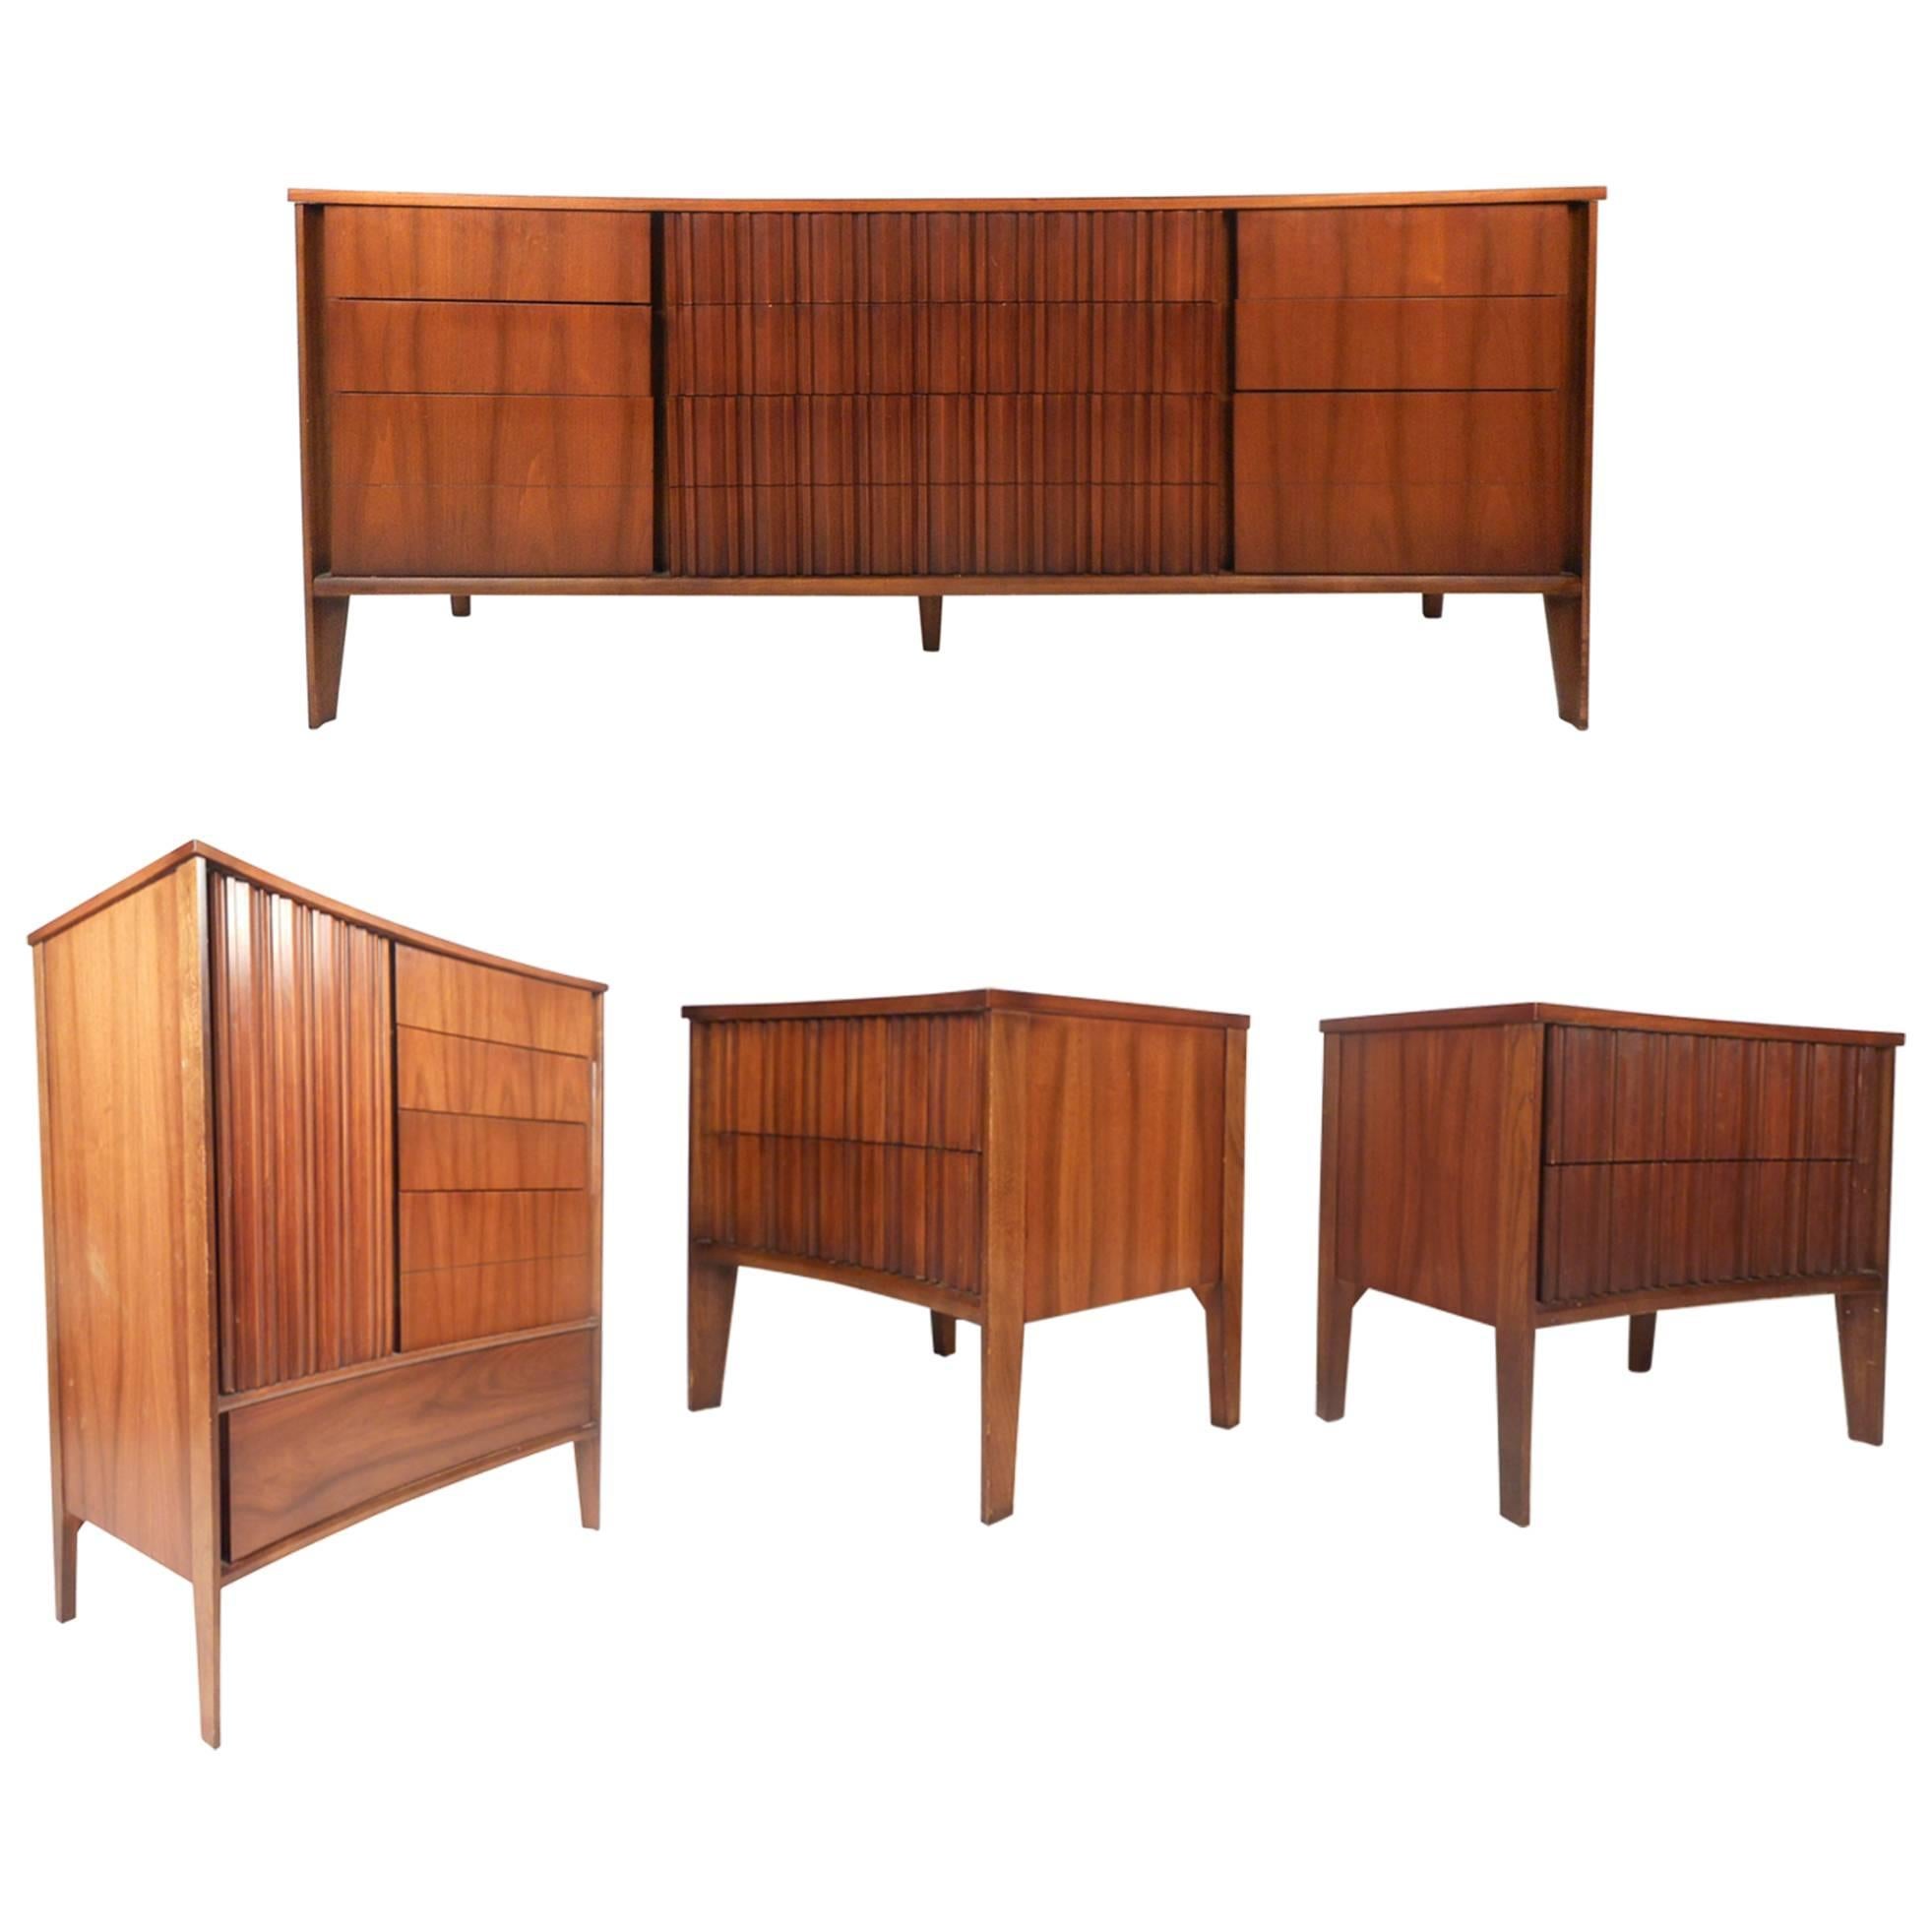 Mid-Century Modern Curved Front Bedroom Set by Strata for Unagusta